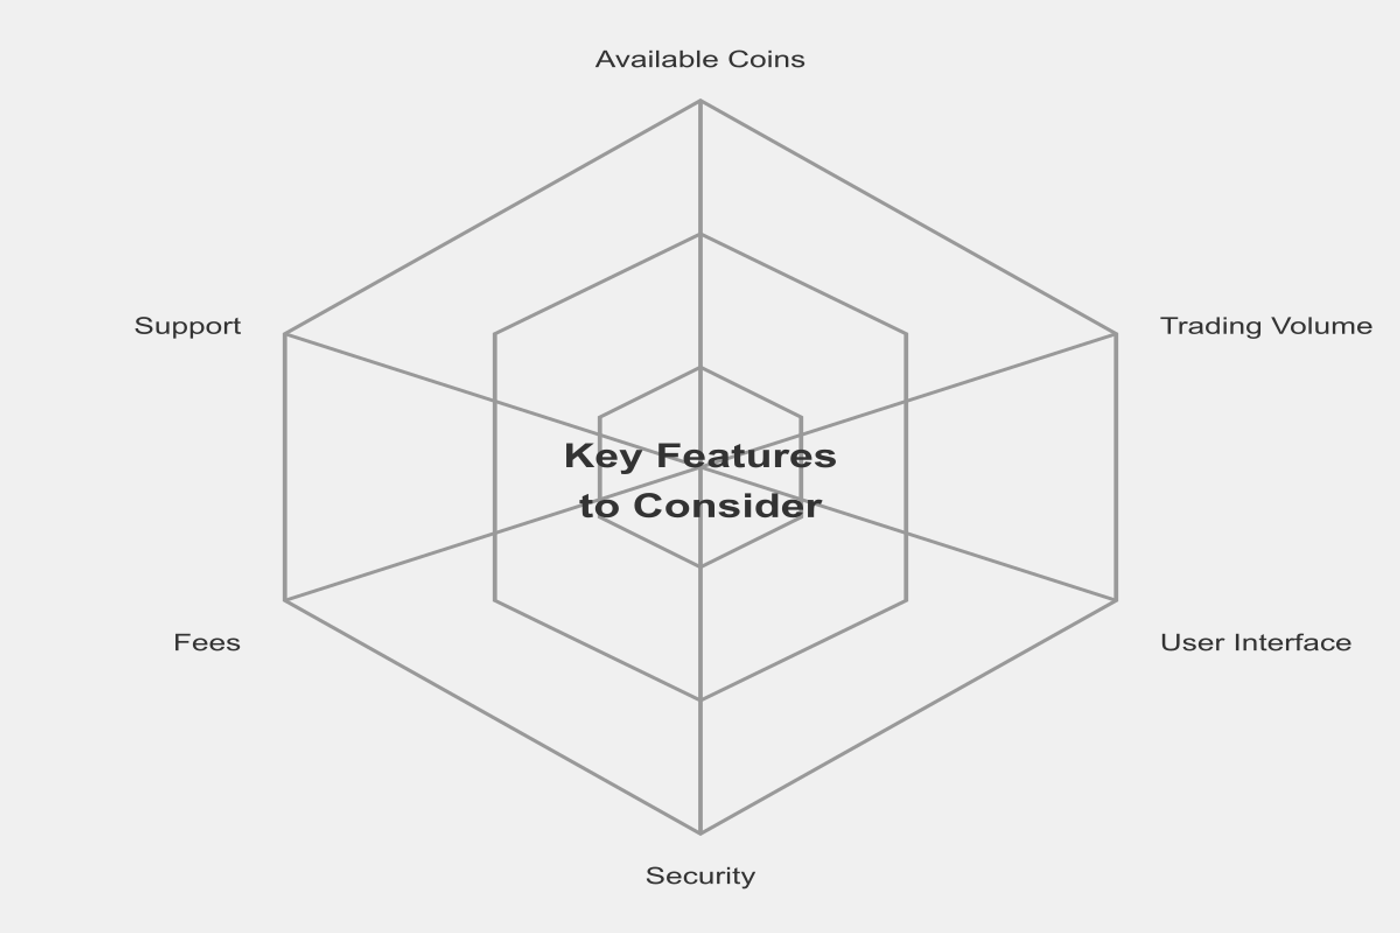 A hexagonal radar chart titled "Key Features to Consider" for cryptocurrency exchanges. Six points are labeled: Available Coins, Trading Volume, User Interface, Security, Fees, and Support. The chart uses concentric hexagons to indicate different levels of importance or performance for each feature